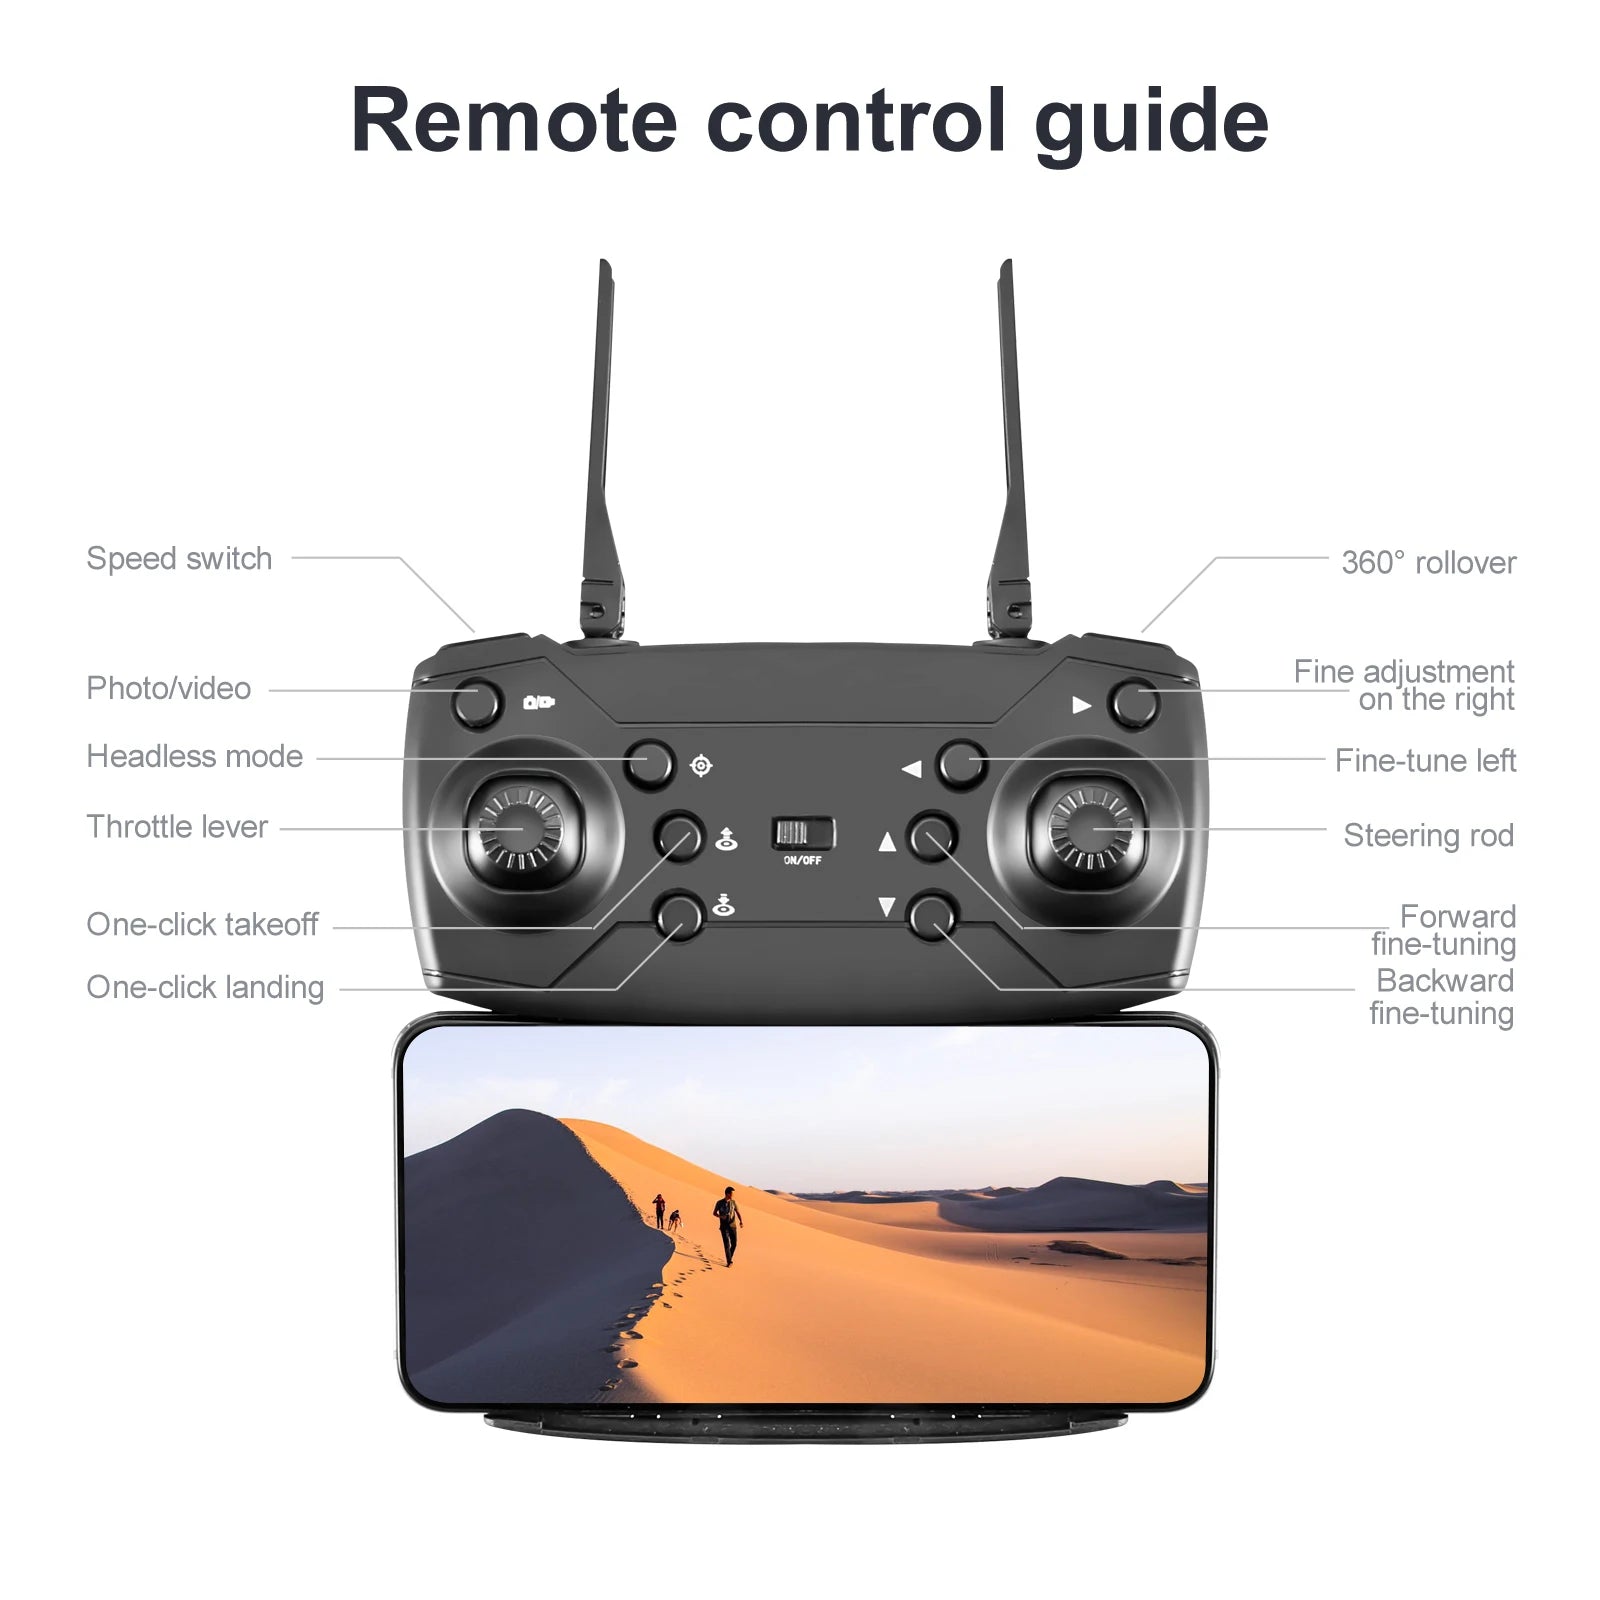 XYRC New KY603 Mini Drone, remote control guide speed switch 3605 rollover photolvideo fine-